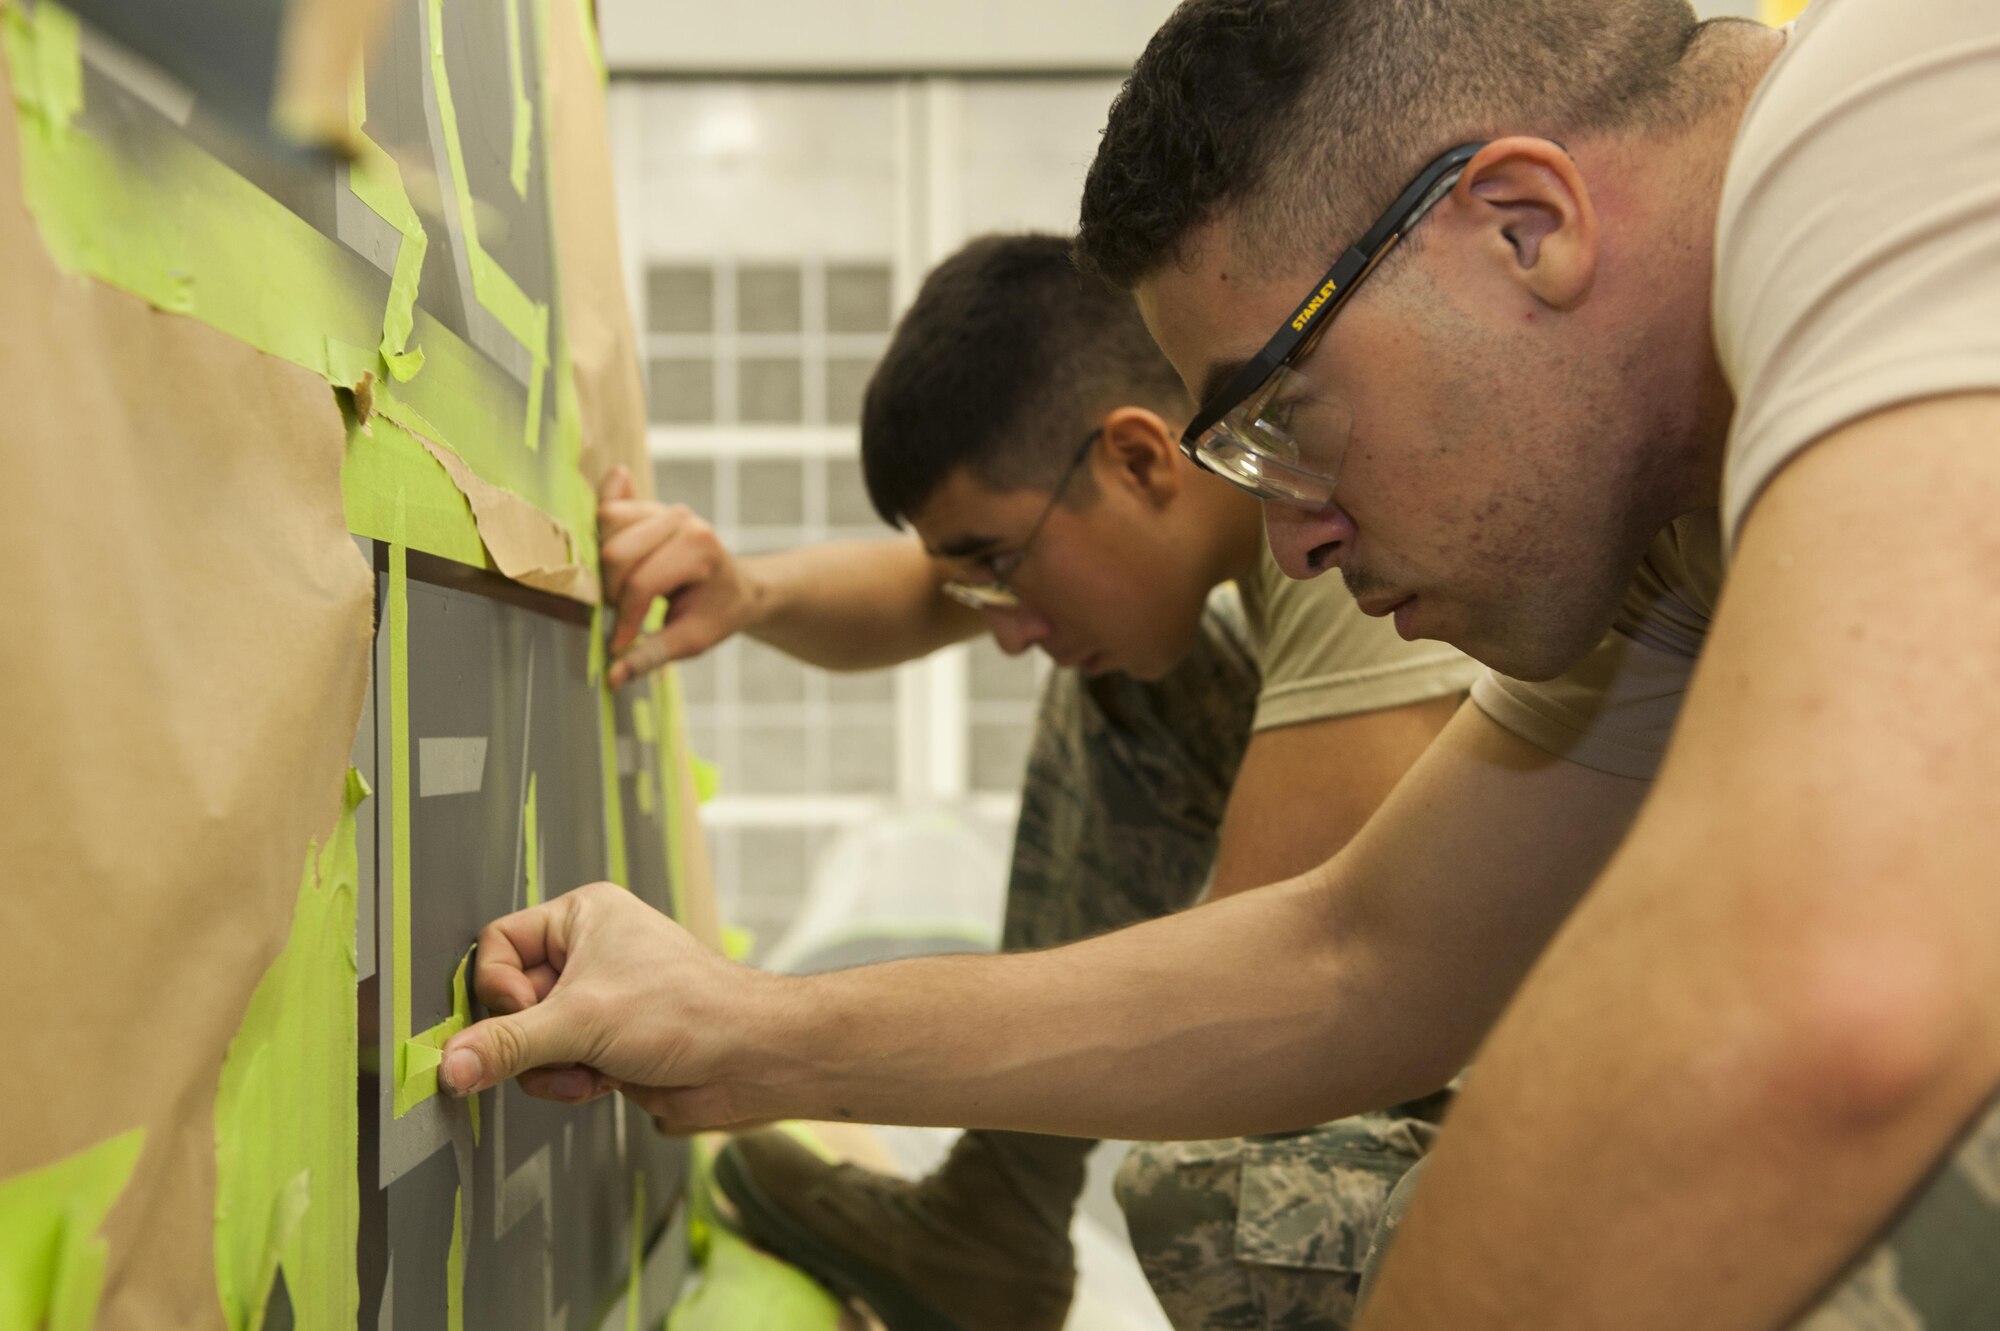 Airmen 1st Class Robert Rocha (left) and Ryan Magusiak, aircraft structural maintenance technicians with the 49th Maintenance Squadron, tape off the tail of the 54th Fighter Squadron’s F-16 Fighting Falcon flagship in preparation for painting at Holloman Air Force Base, N.M., Nov. 10, 2015. Corrosion control specialists stripped, primed and painted every flagship tail, replacing the Luke AFB symbol “LF” with Holloman’s symbol “HO.” (U.S. Air Force photo/Airman 1st Class Randahl J. Jenson)